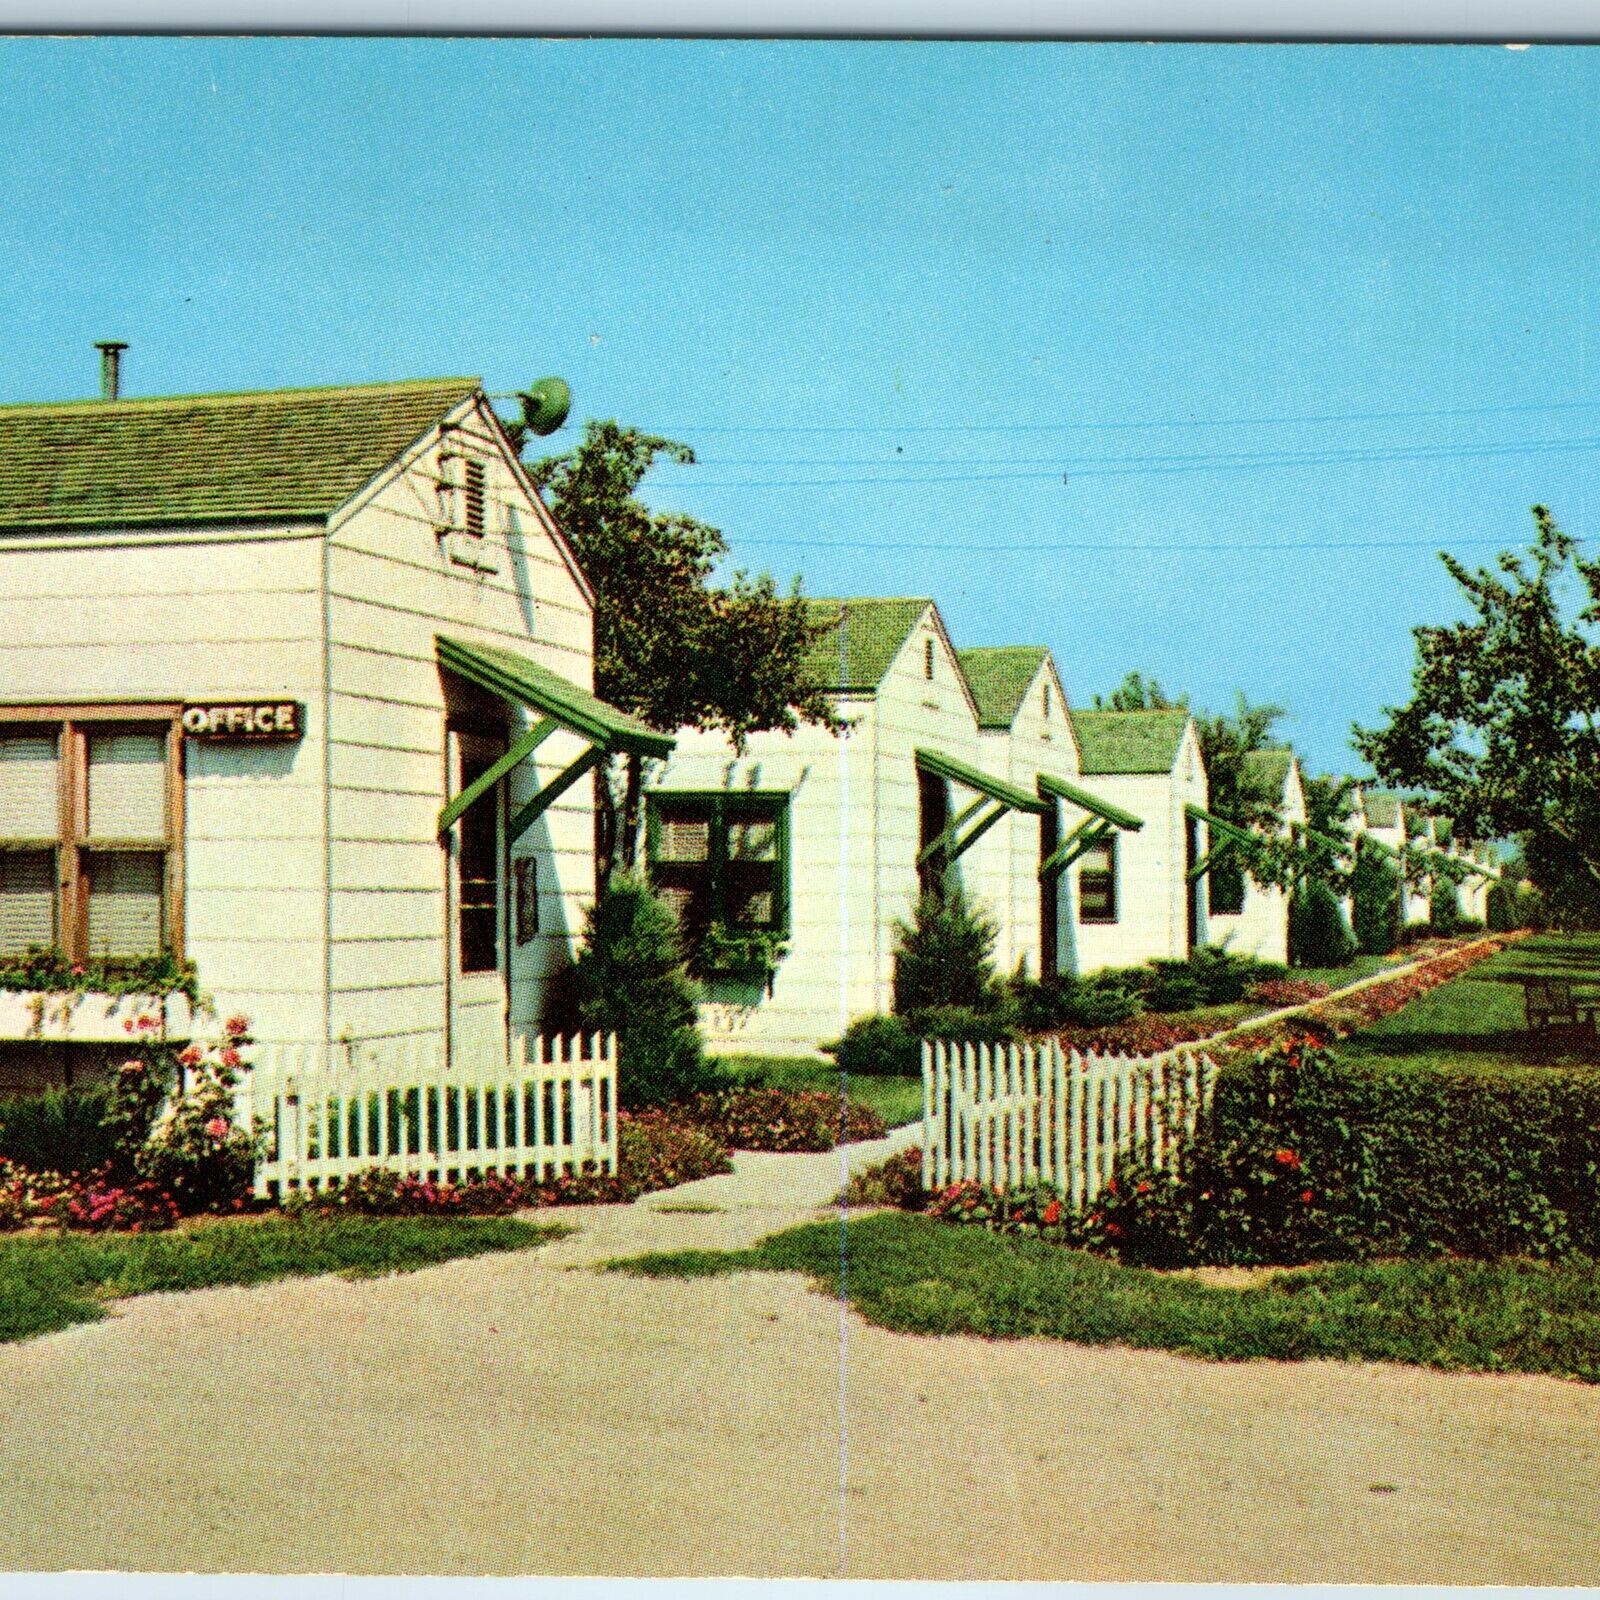 c1950s Council Bluffs, IA Grove Motel Trailer Court Offices Hwy 275 Littrel A208